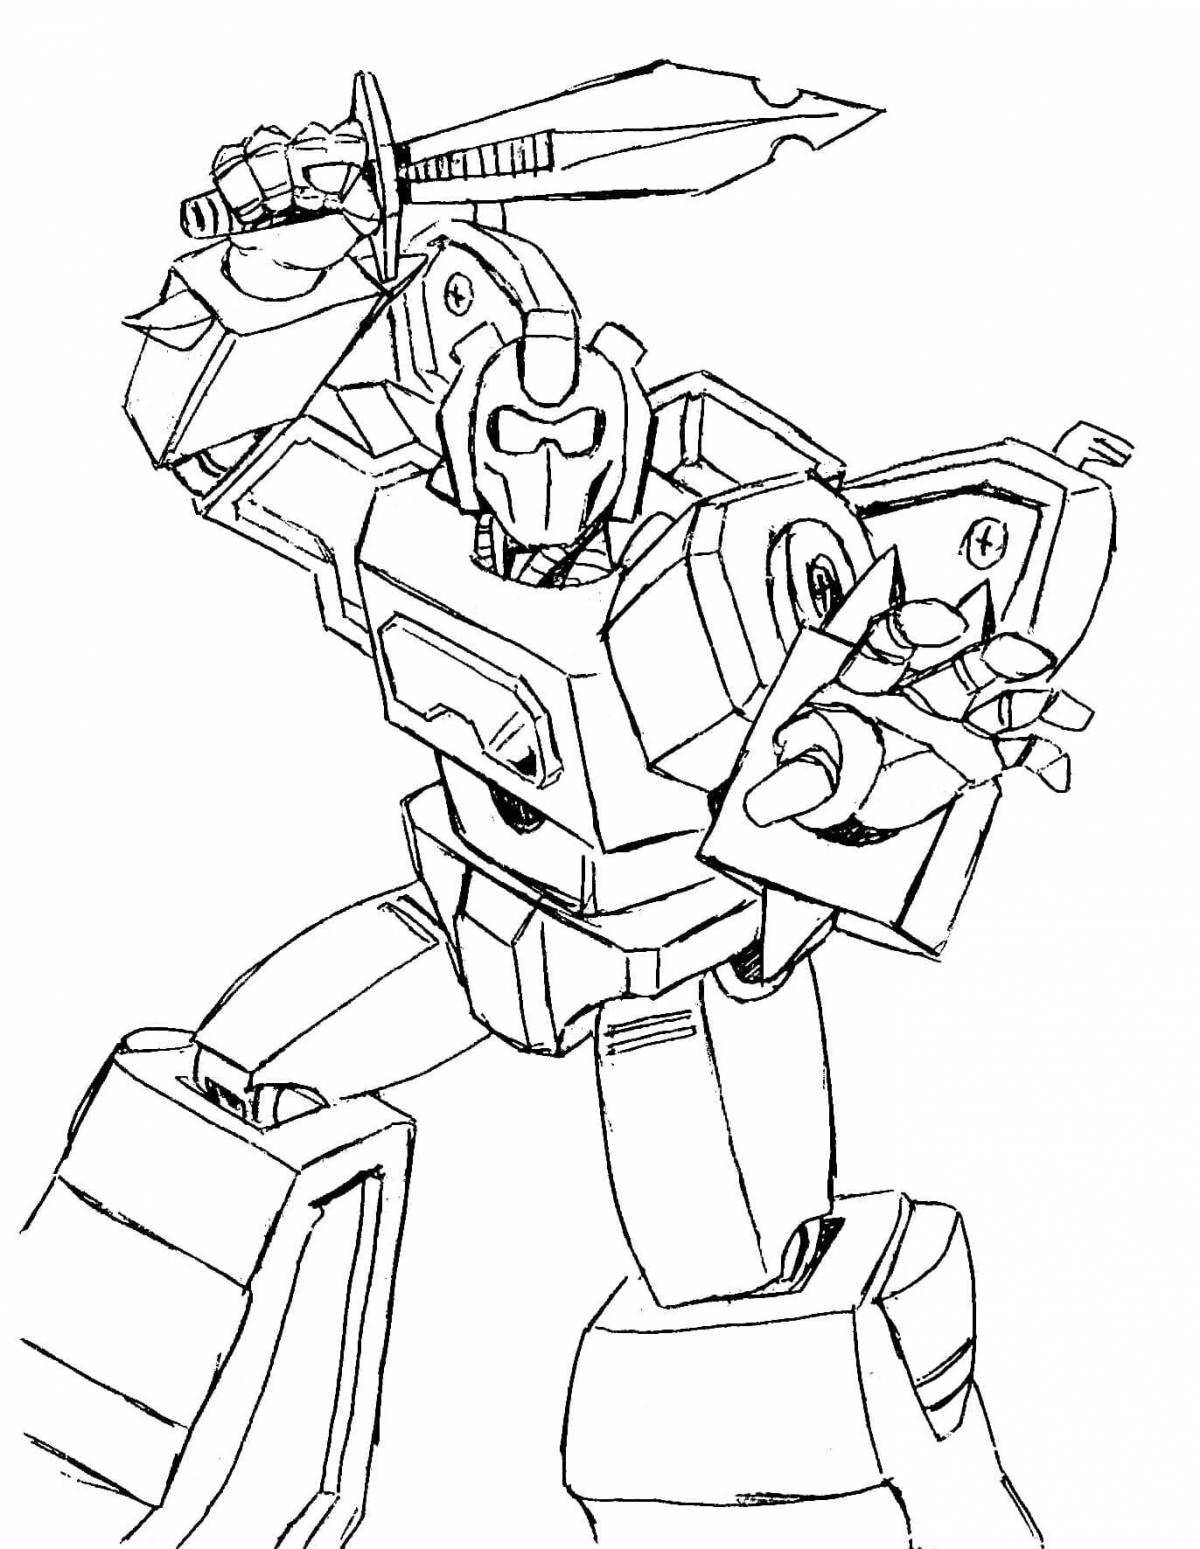 Charming bumblebee coloring page